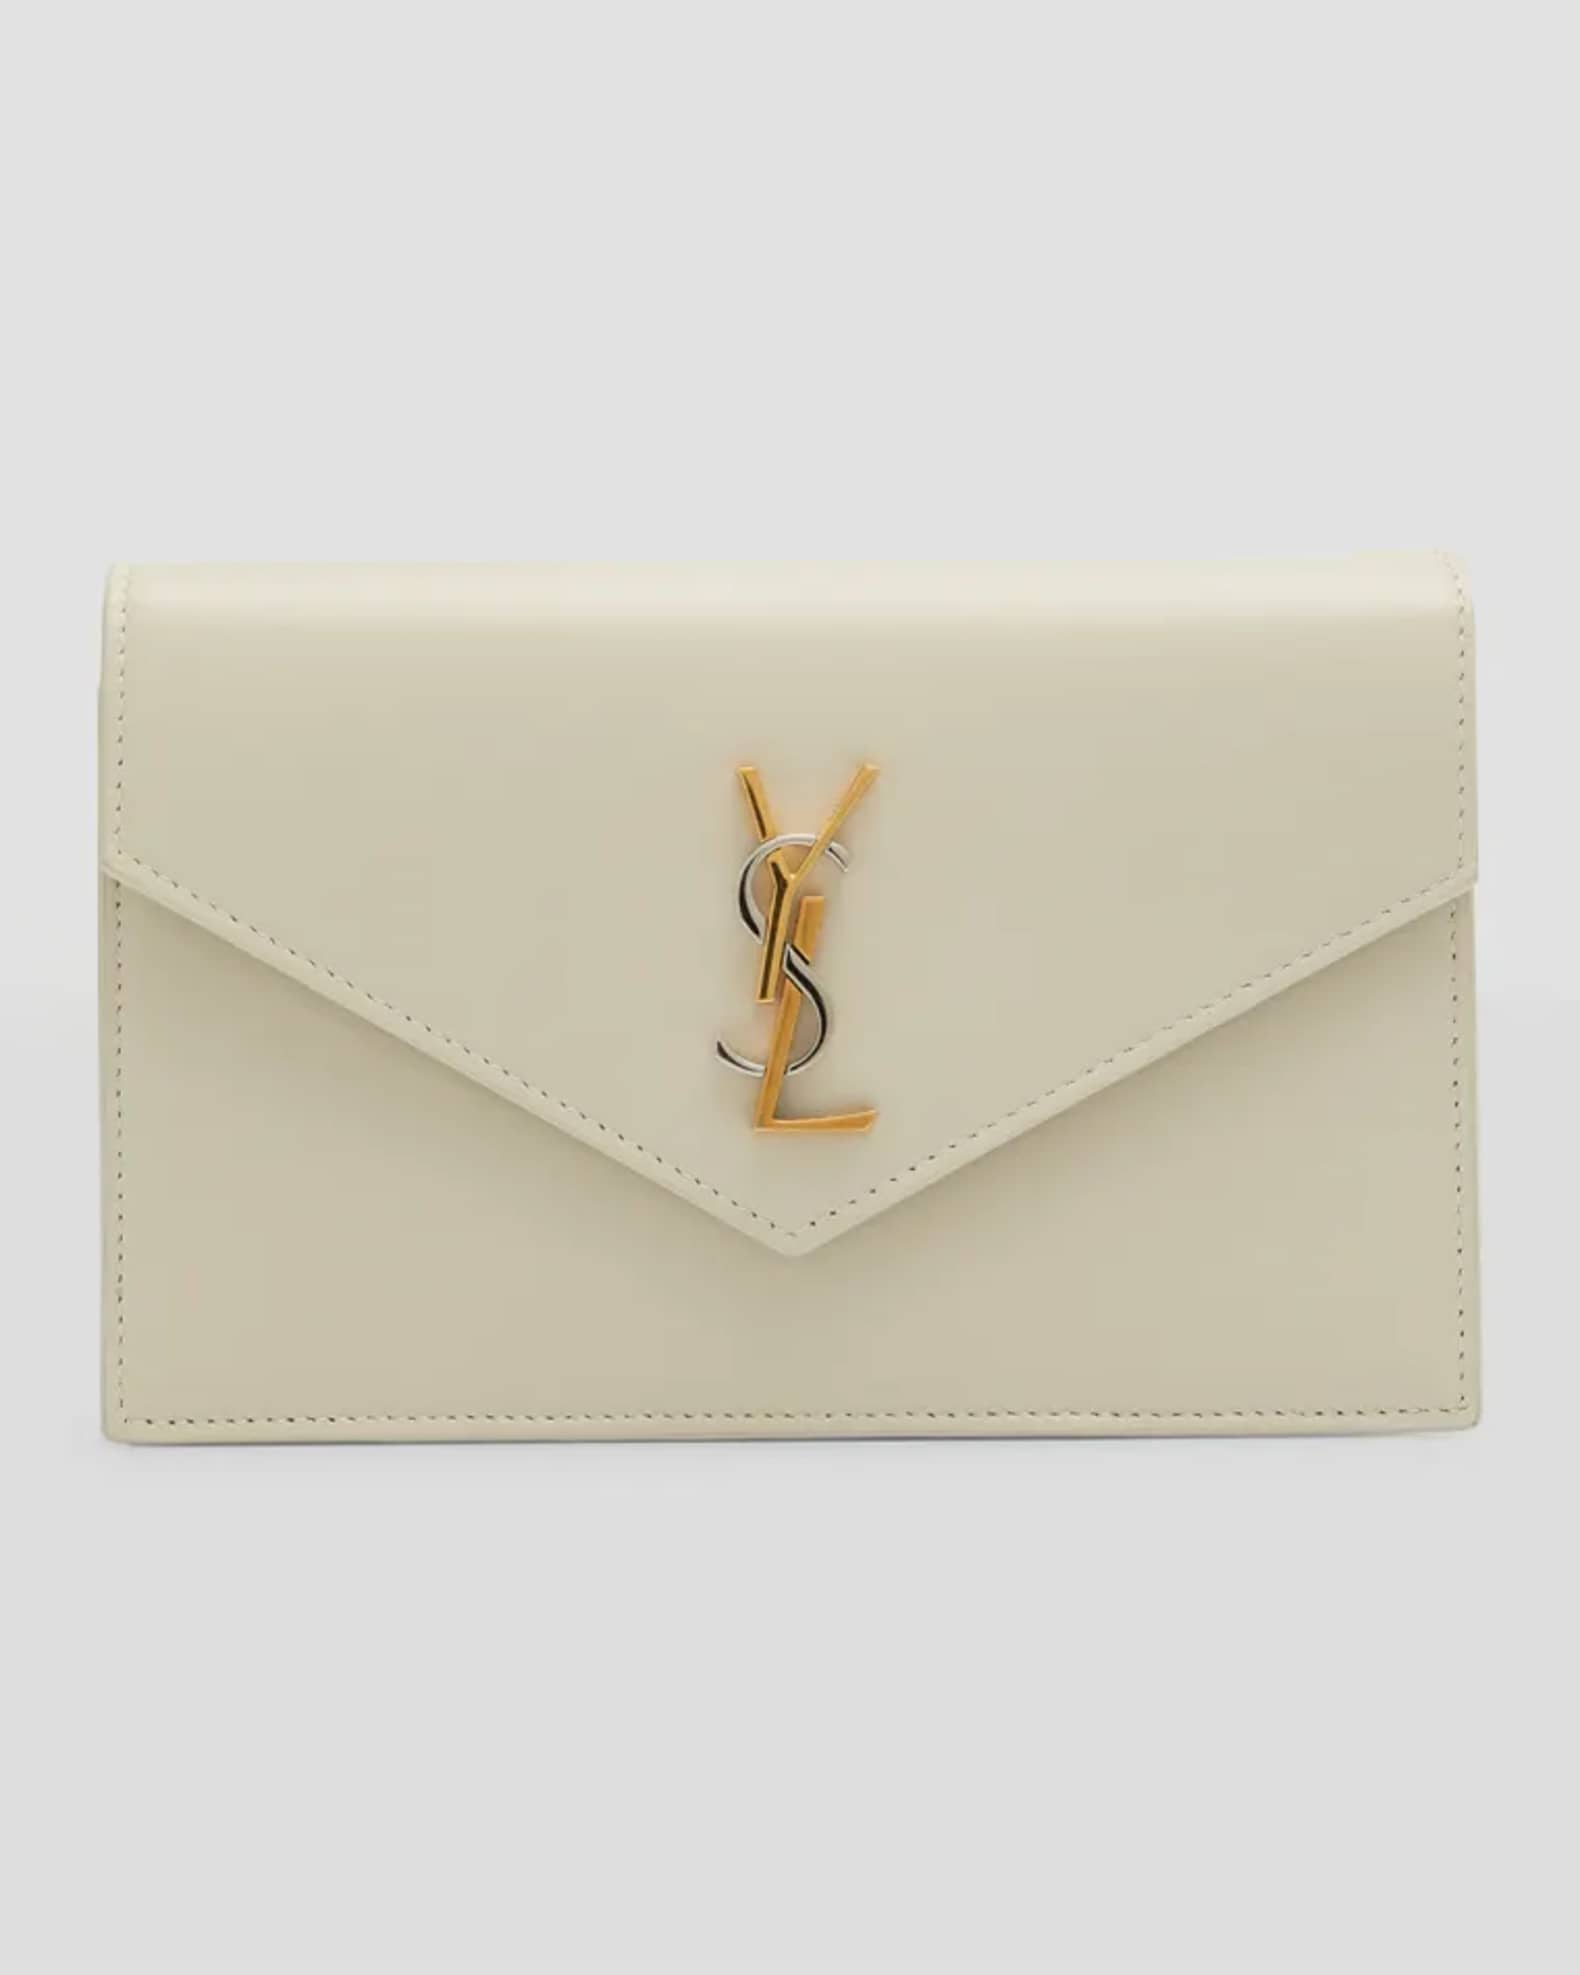 Saint Laurent YSL Monogram Wallet on Chain in Smooth Leather | Neiman ...